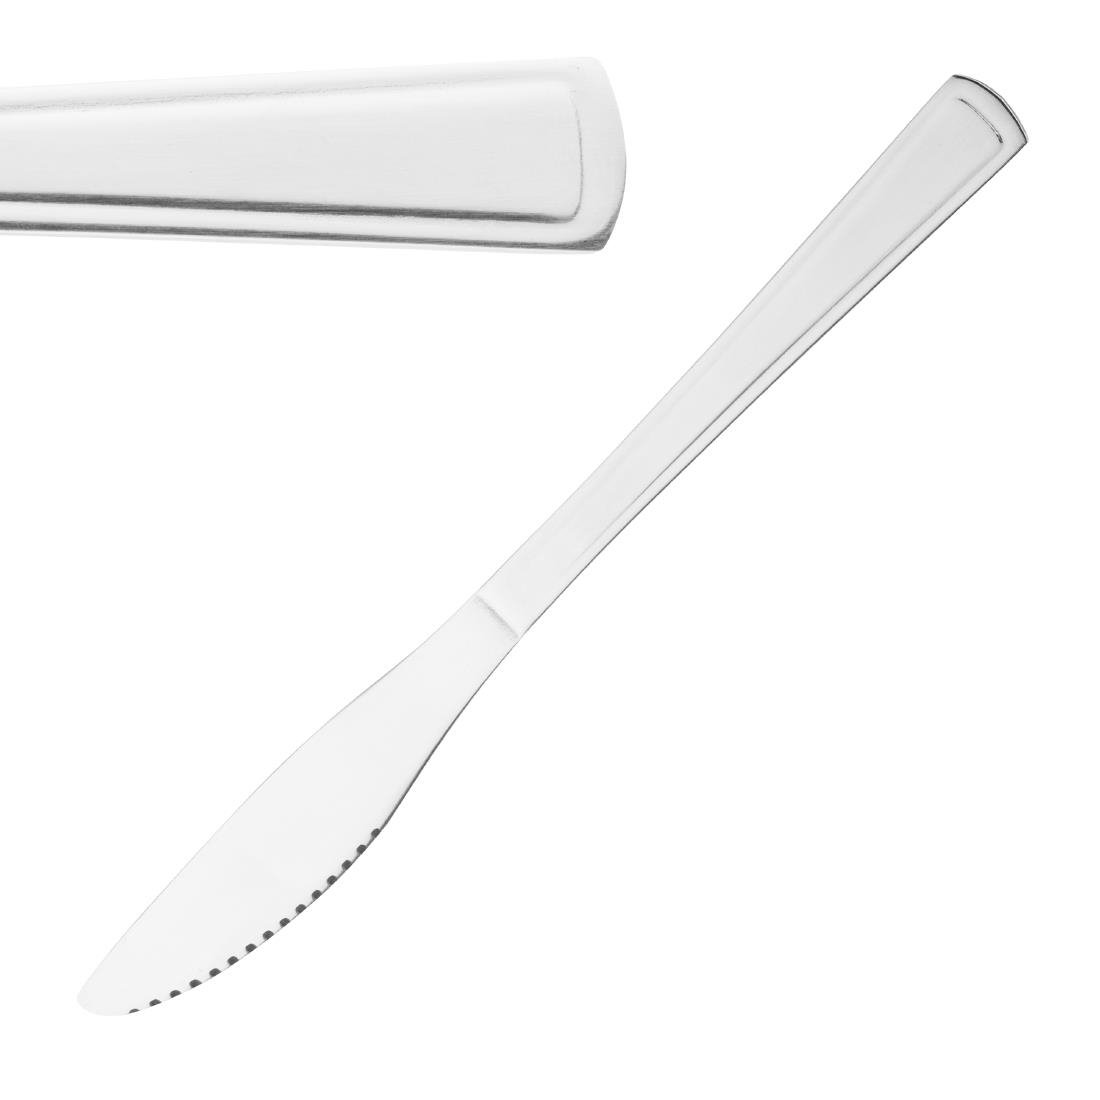 Nisbets Essentials Table Knives Pack of 12 (FA564)